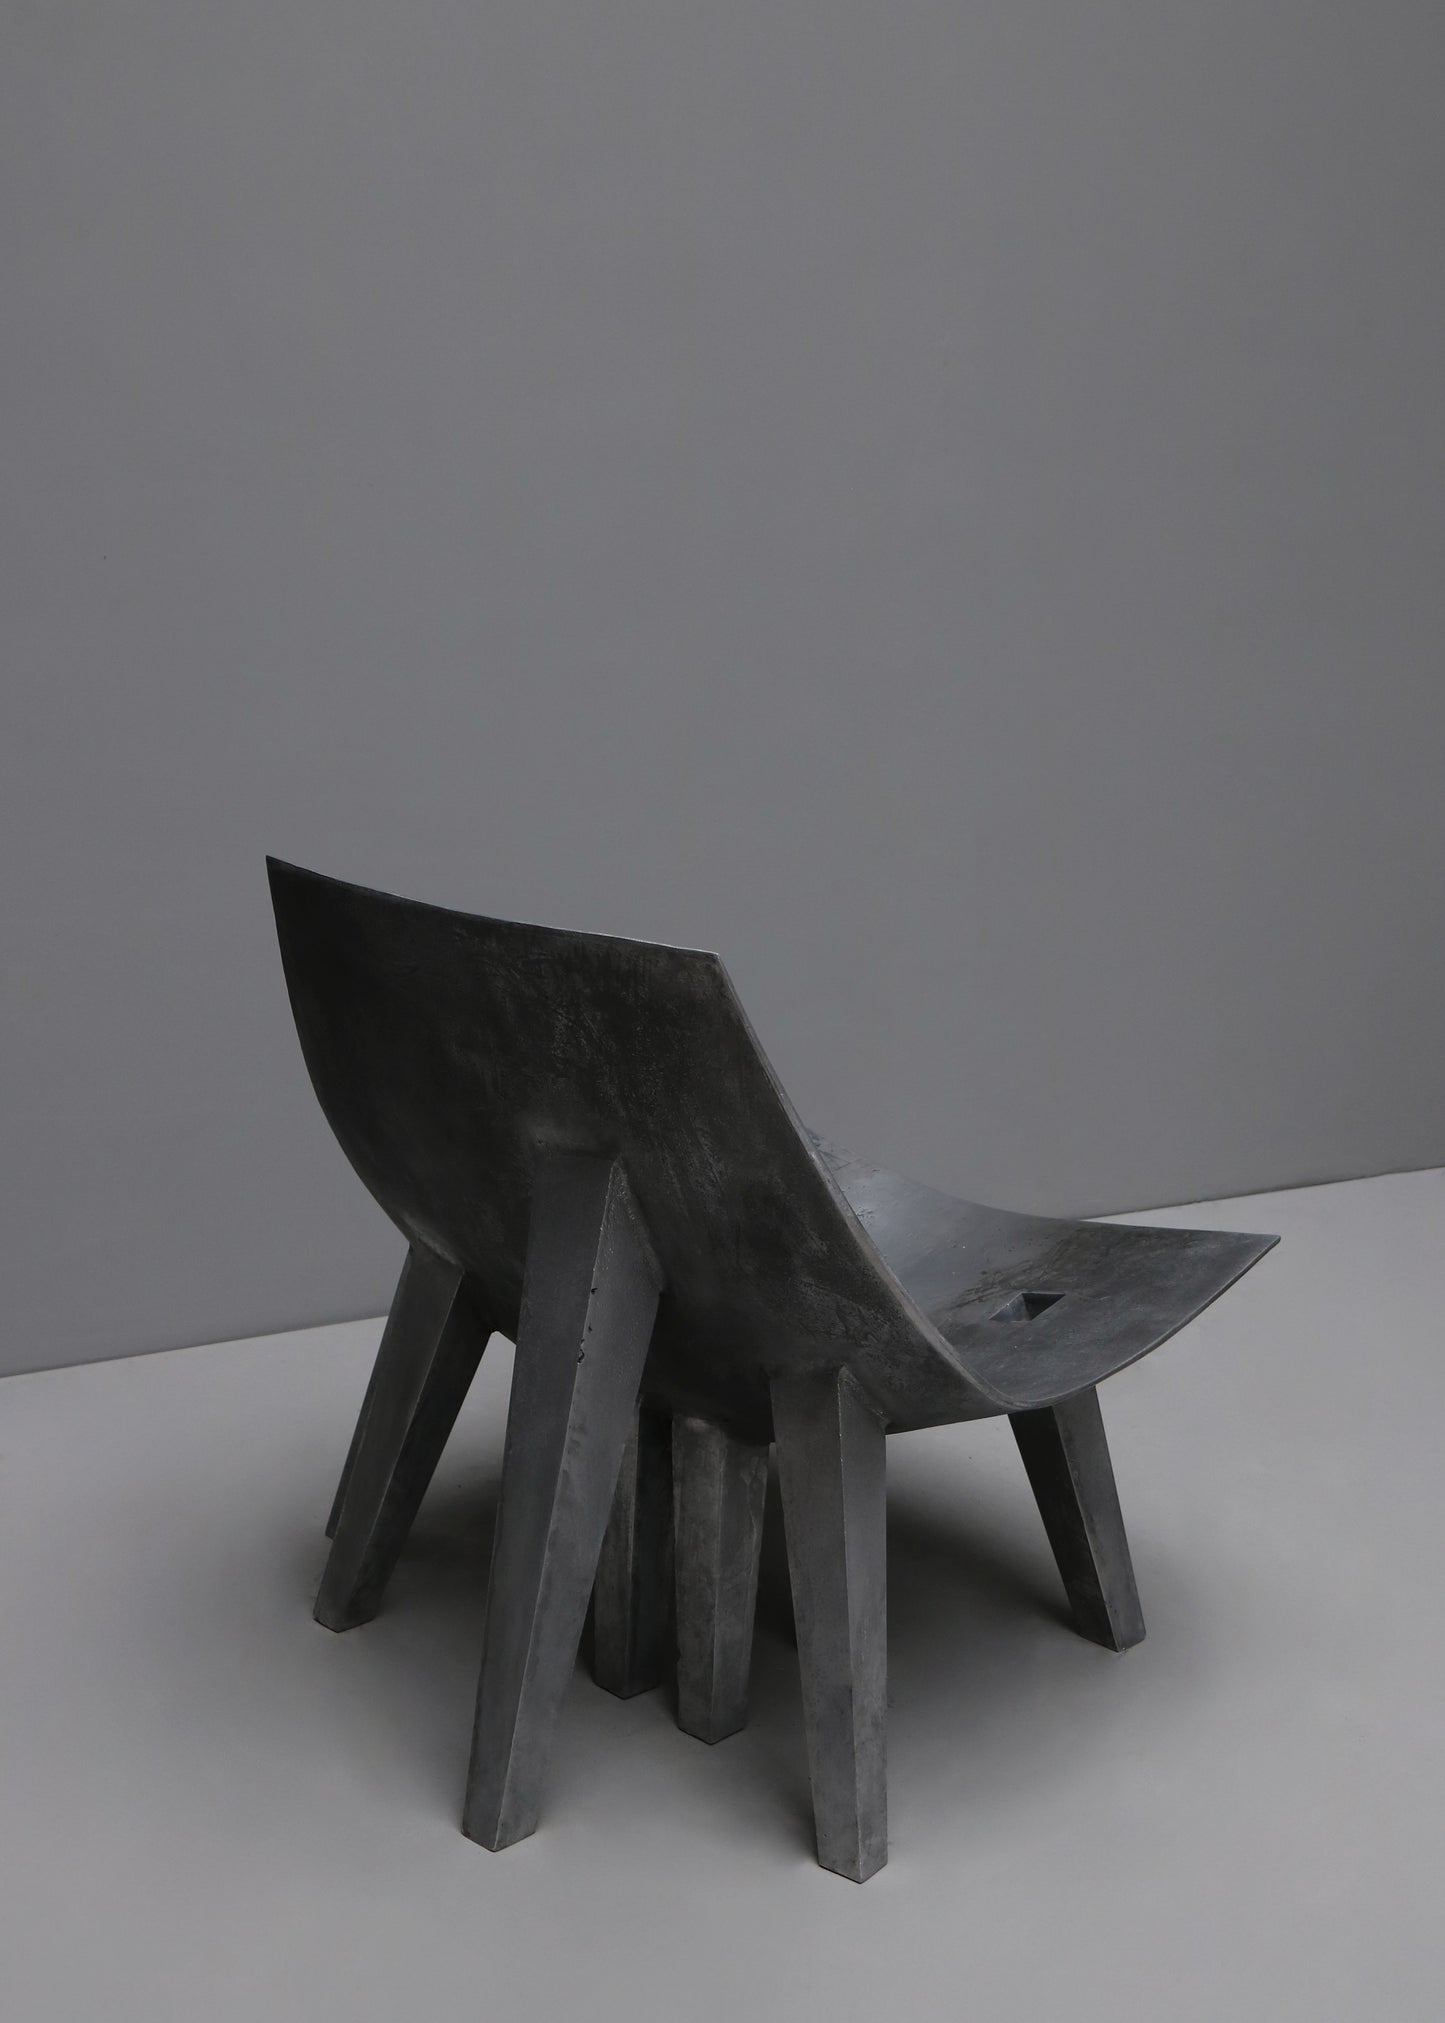 "EXTRUSION EASY CHAIR" BY JAN JANSSEN